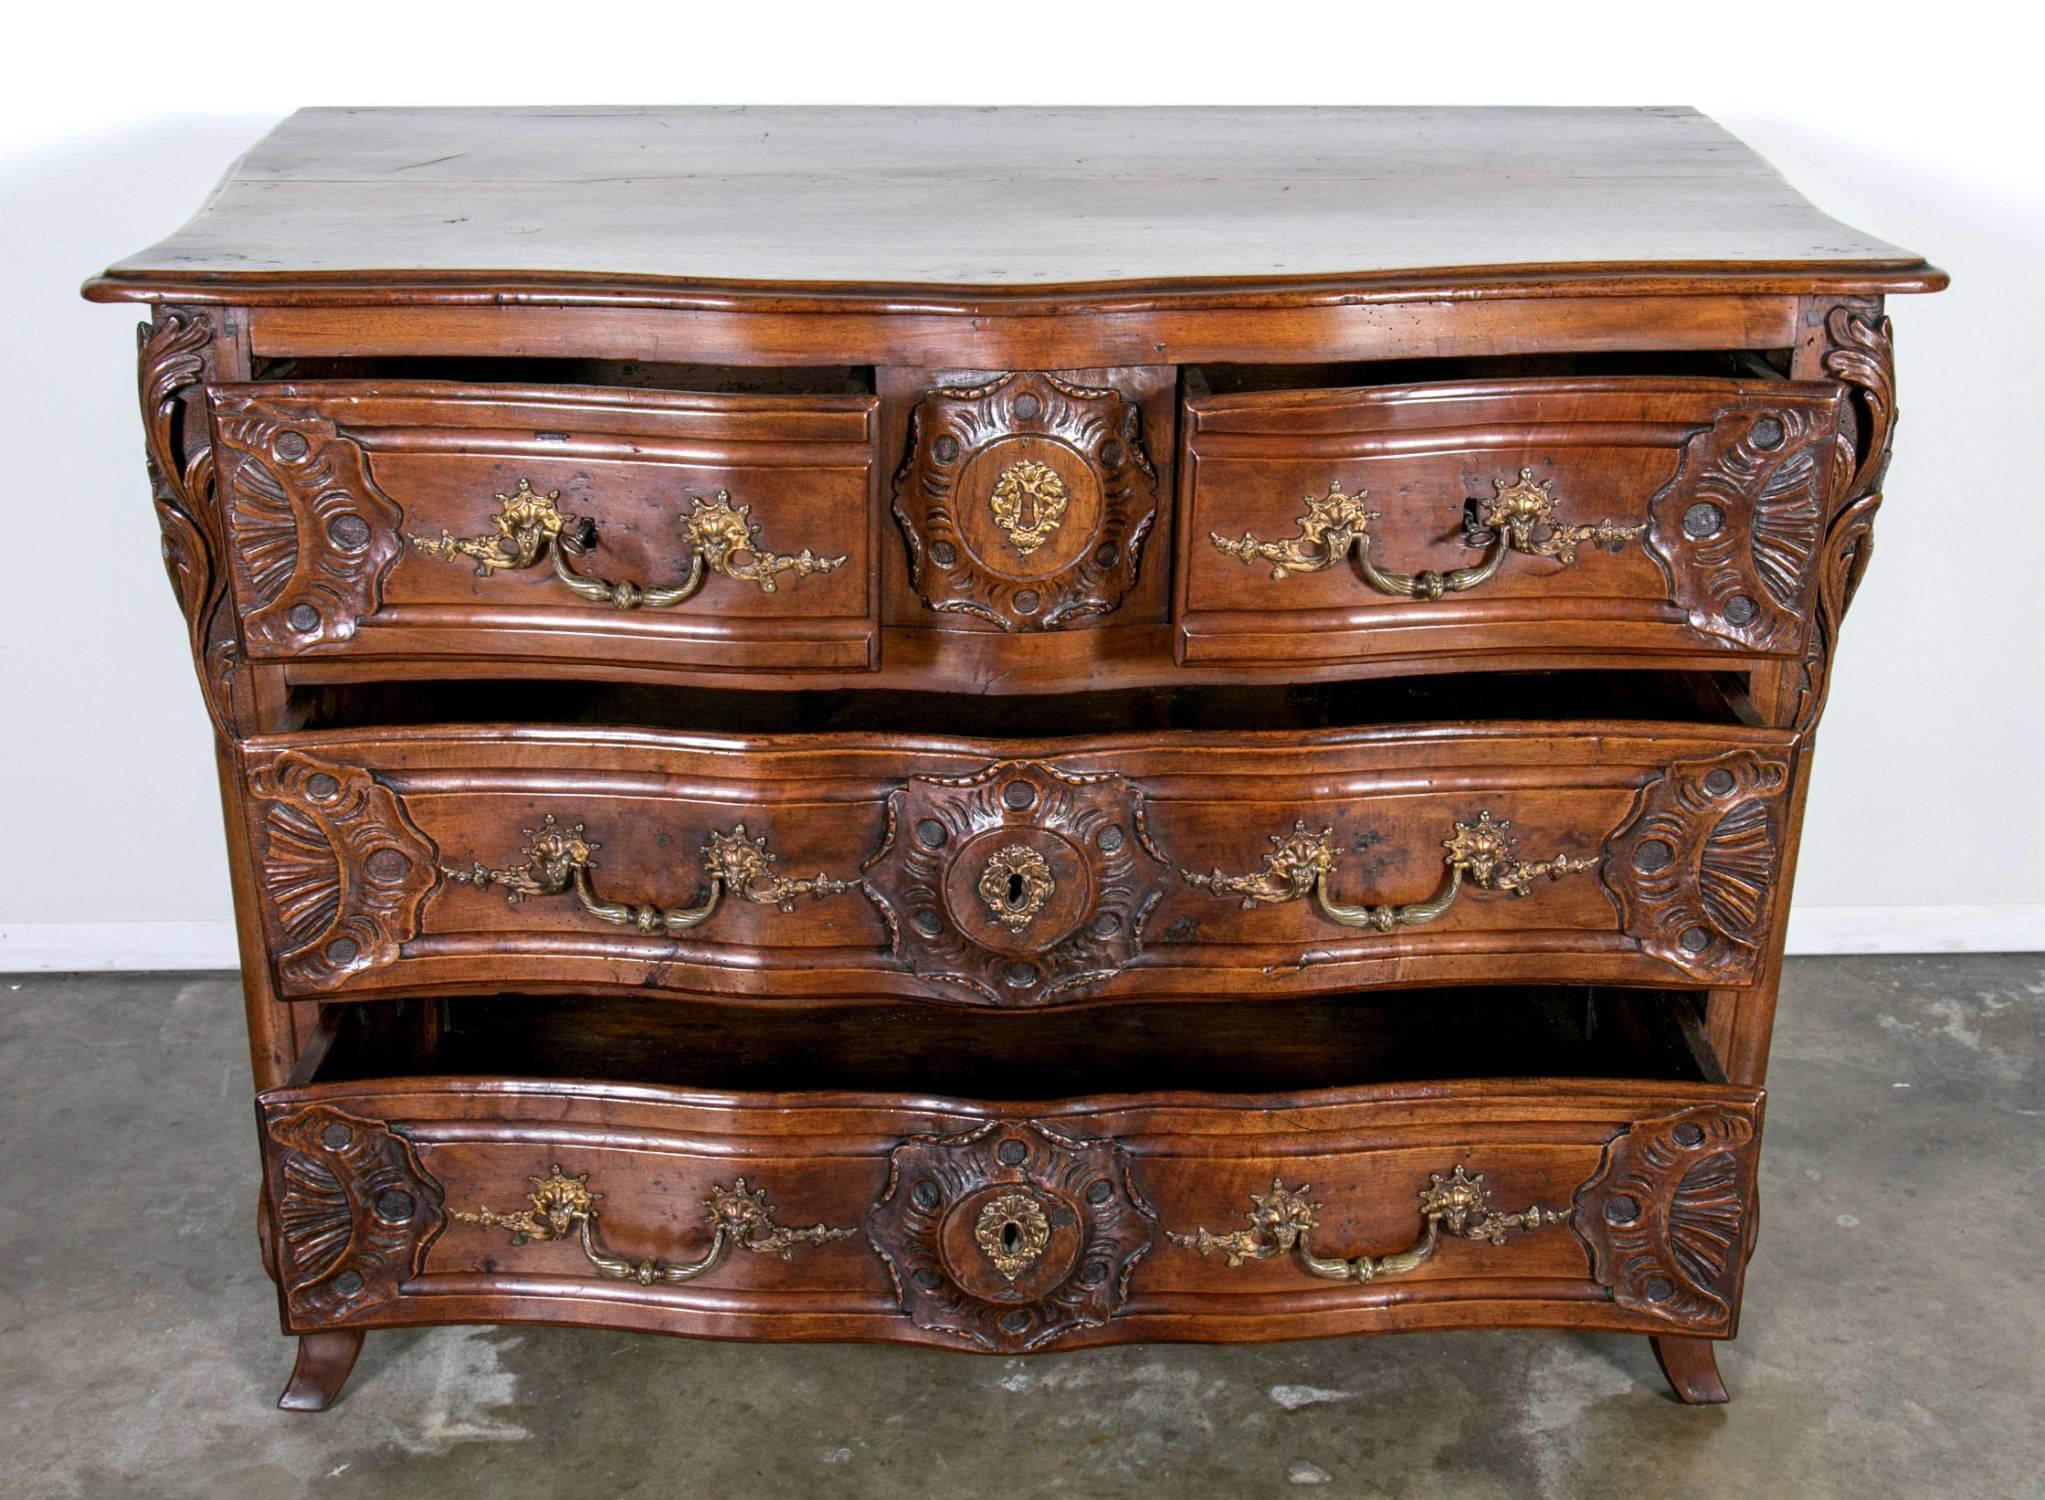 Early 18th Century Exceptional 18th Century Regence Period Lyonnaise Commode Galbée For Sale